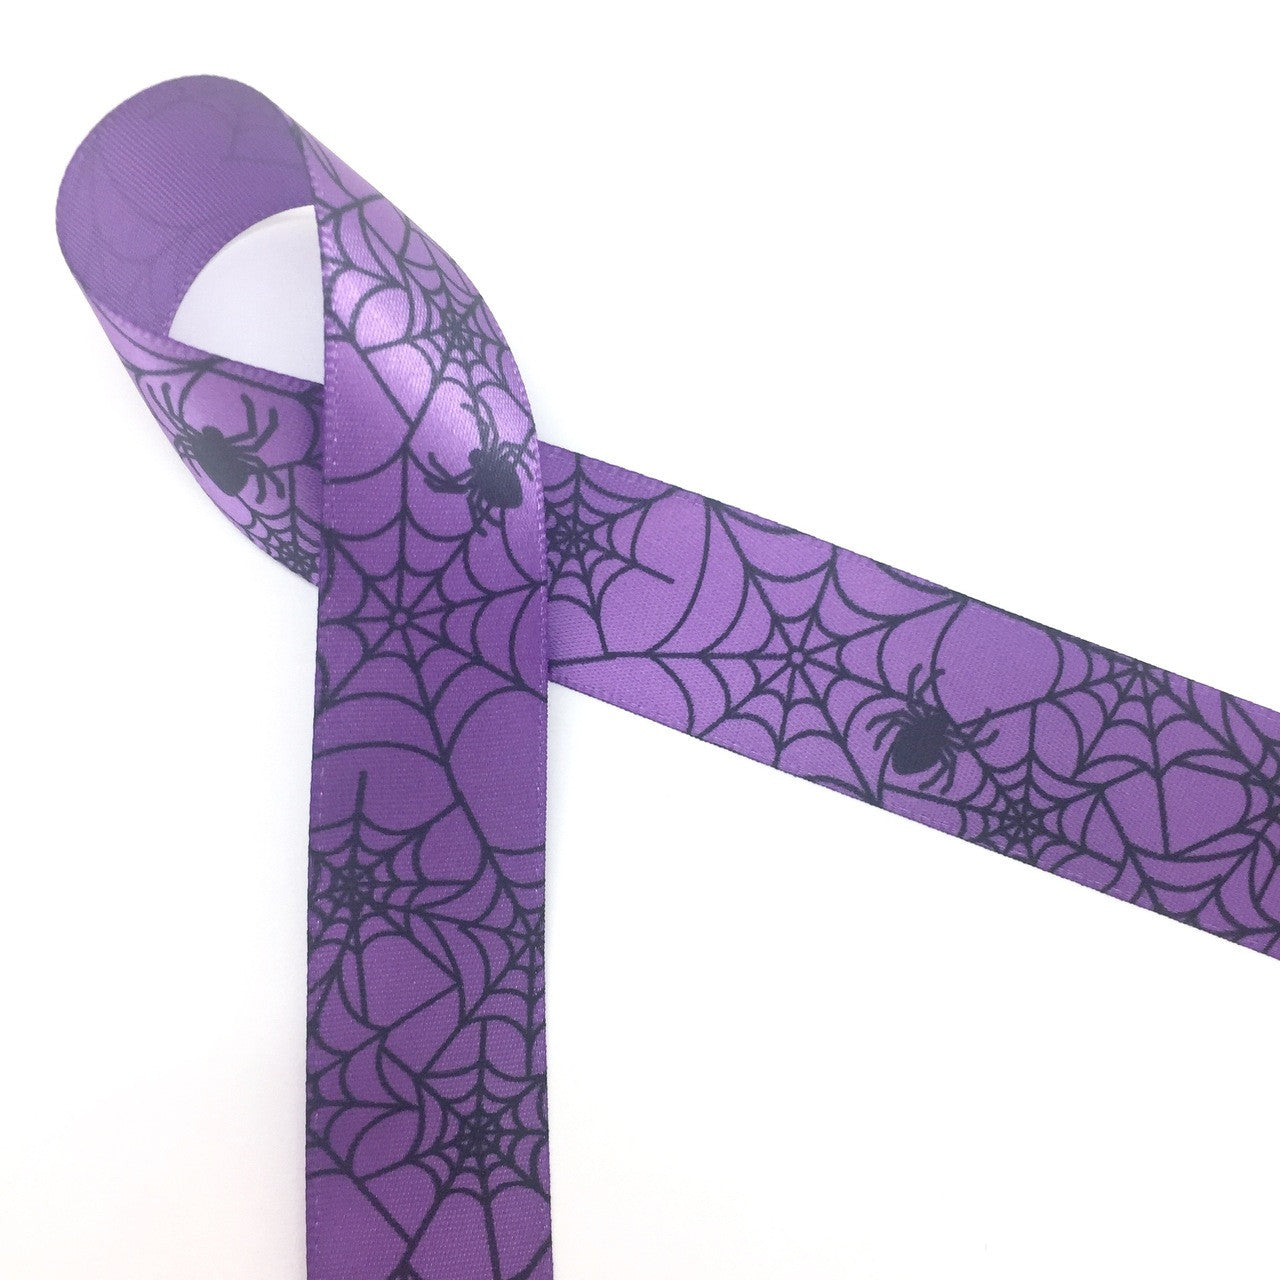 Spider Web Ribbon and Spiders in black ink on 7/8"purple single face satin ribbon